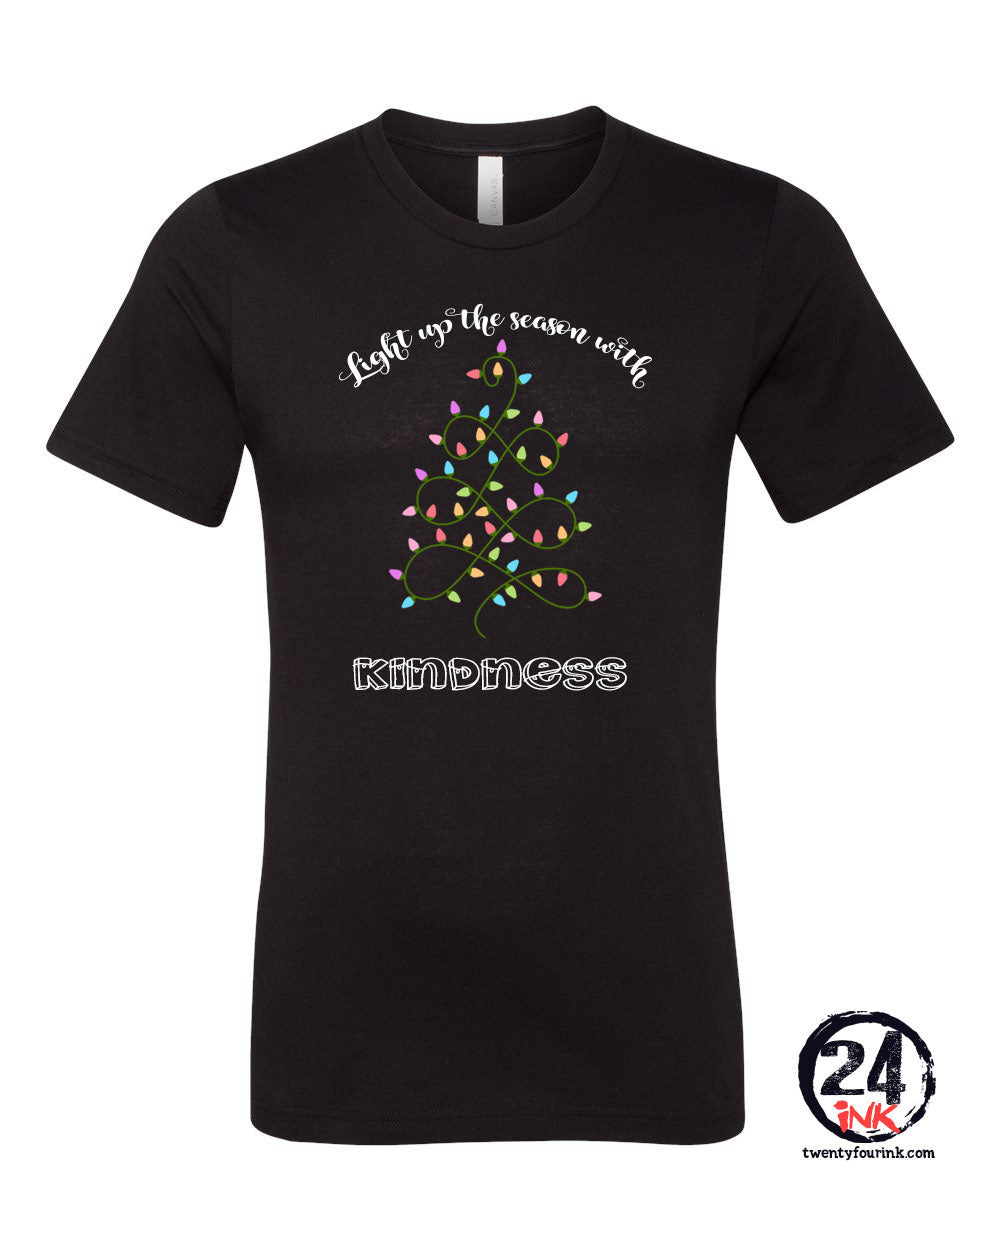 Light up the season with kindness T-Shirt